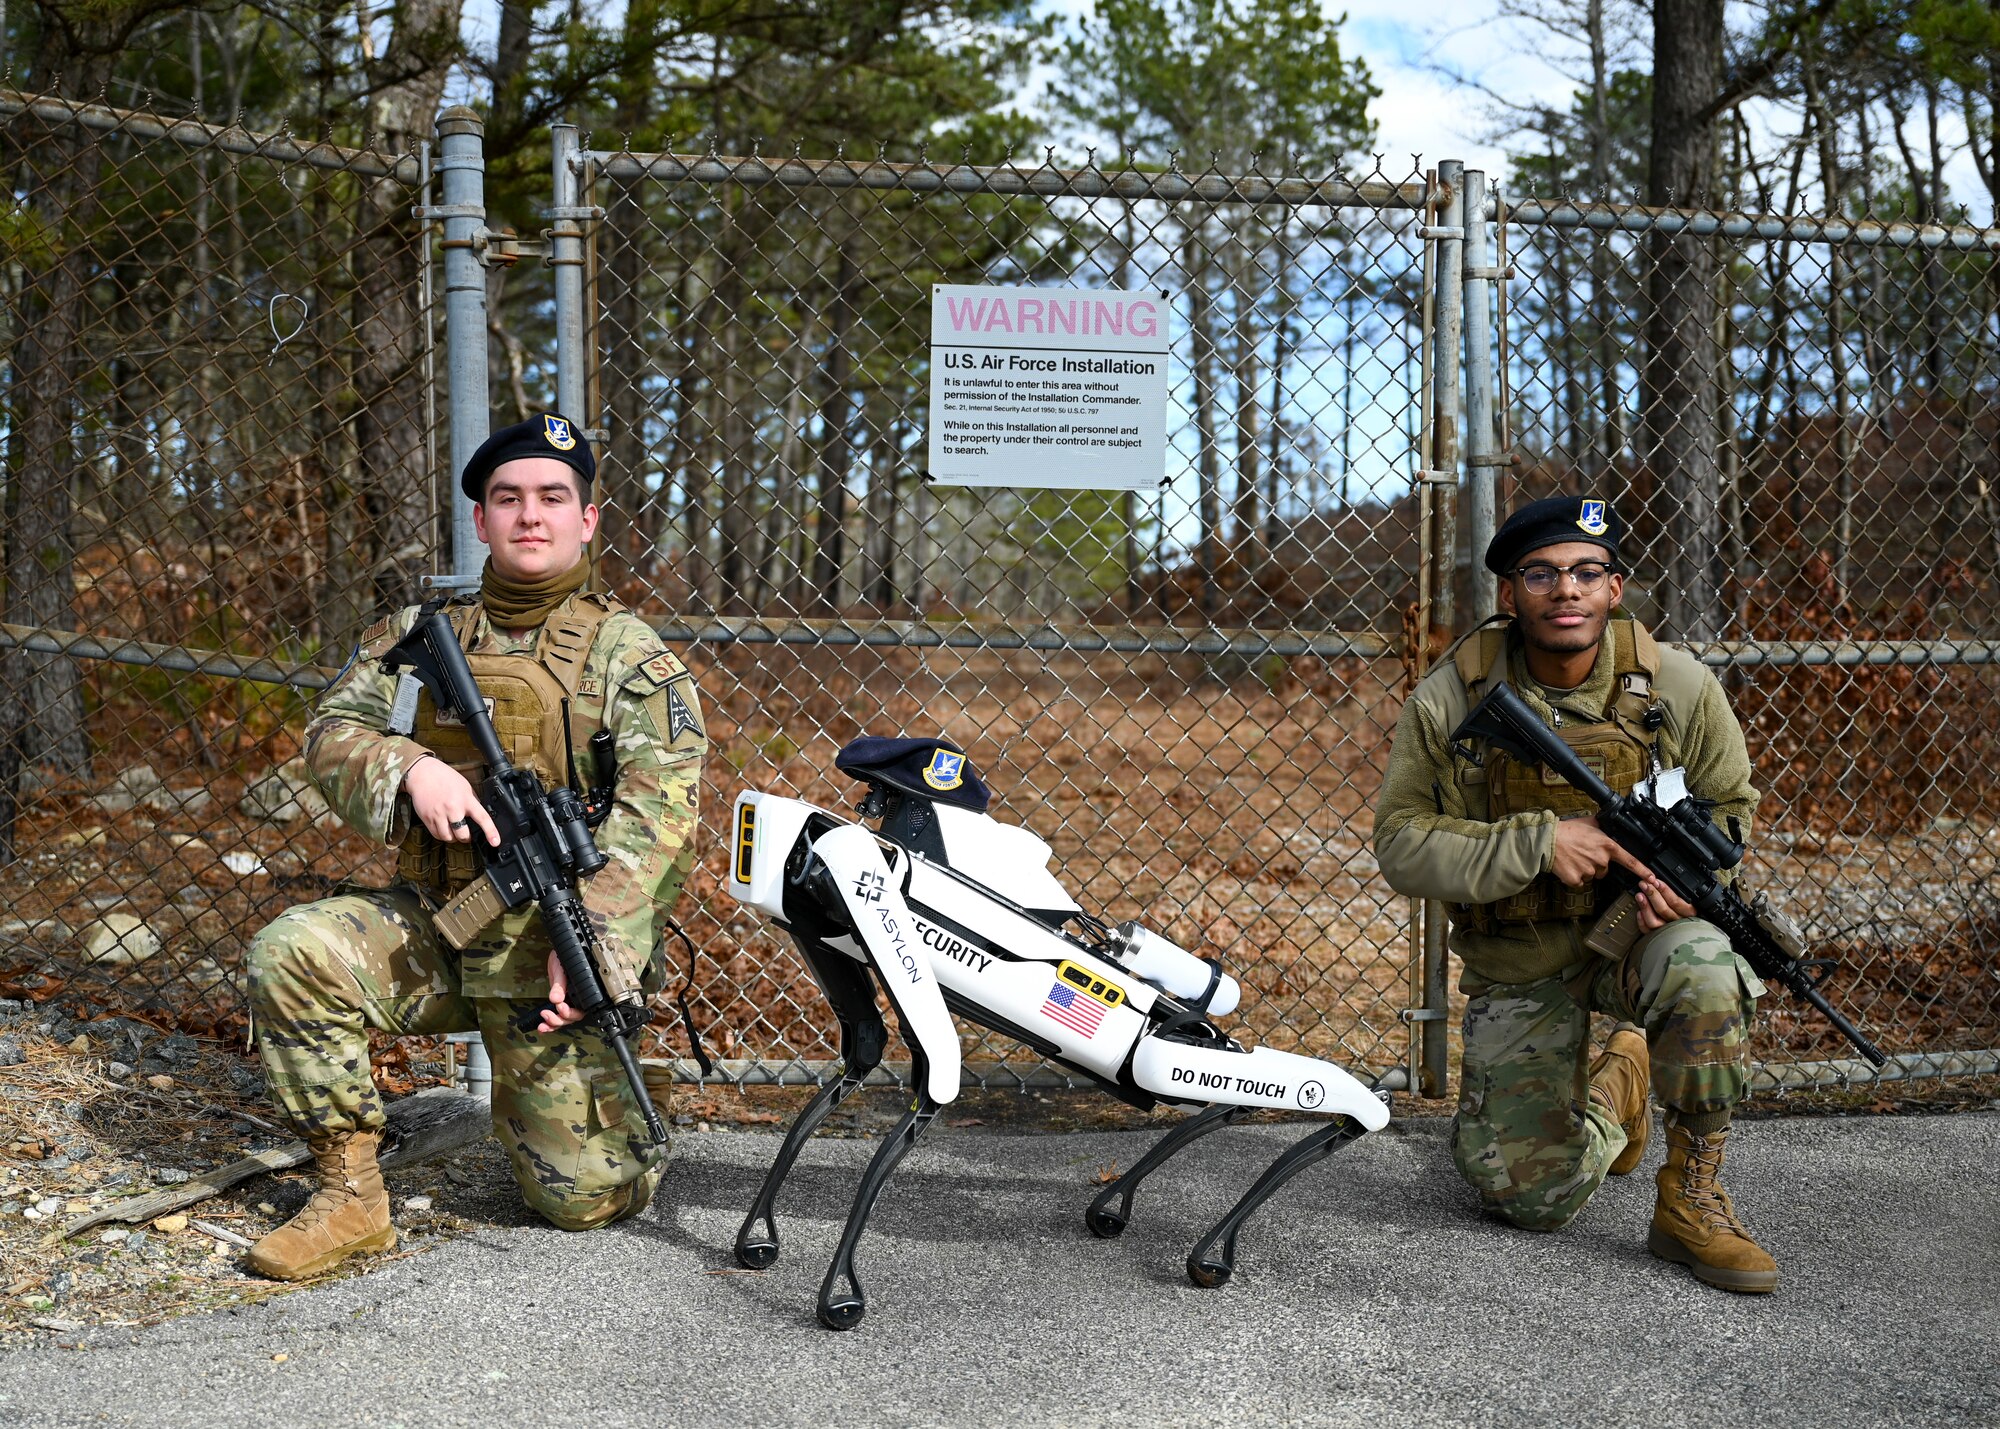 Robot Dog poses with two defenders